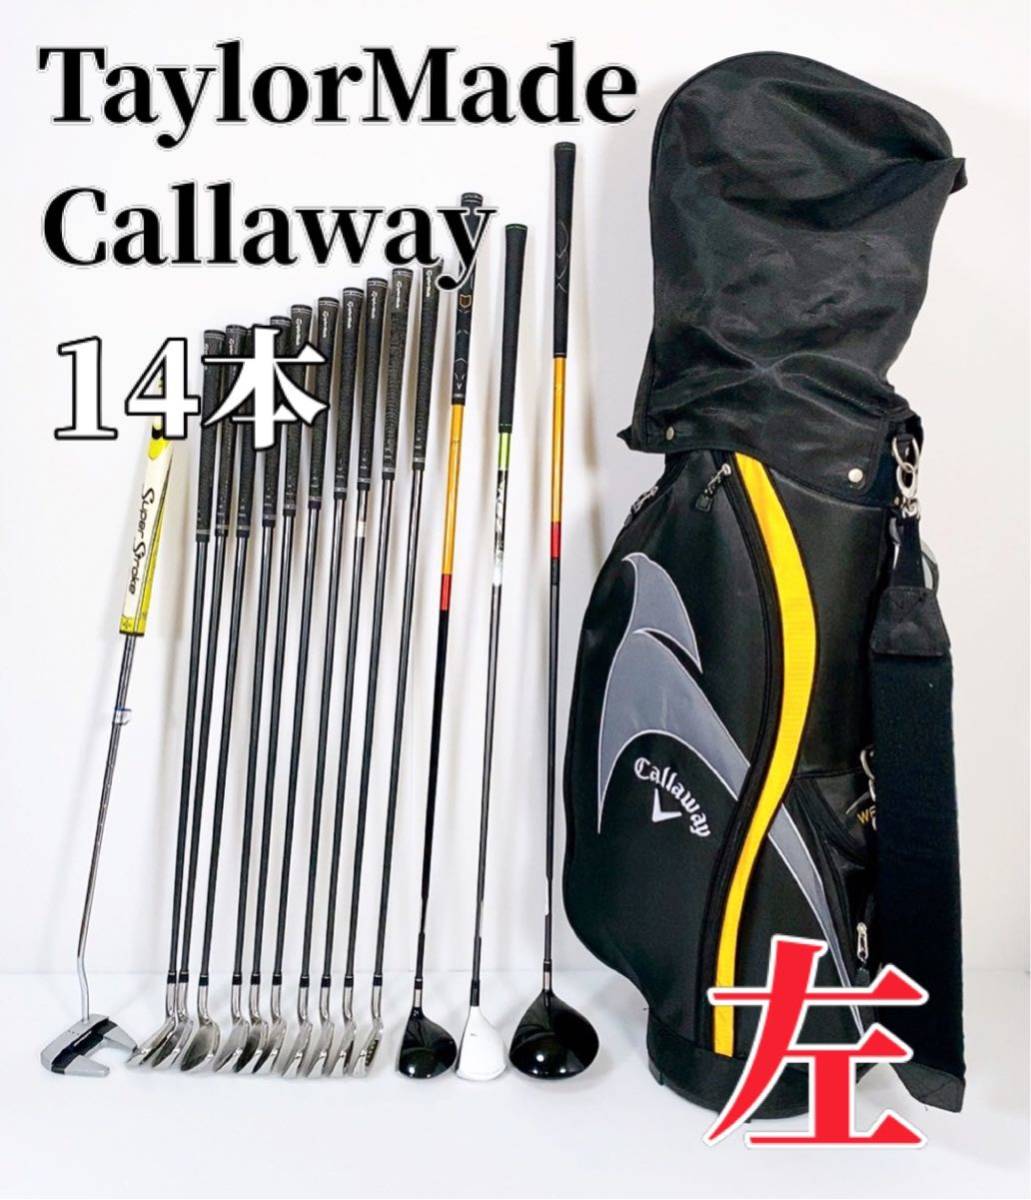 TaylorMade Callaway メンズゴルフセット レフティ 15点セット WARBIRD